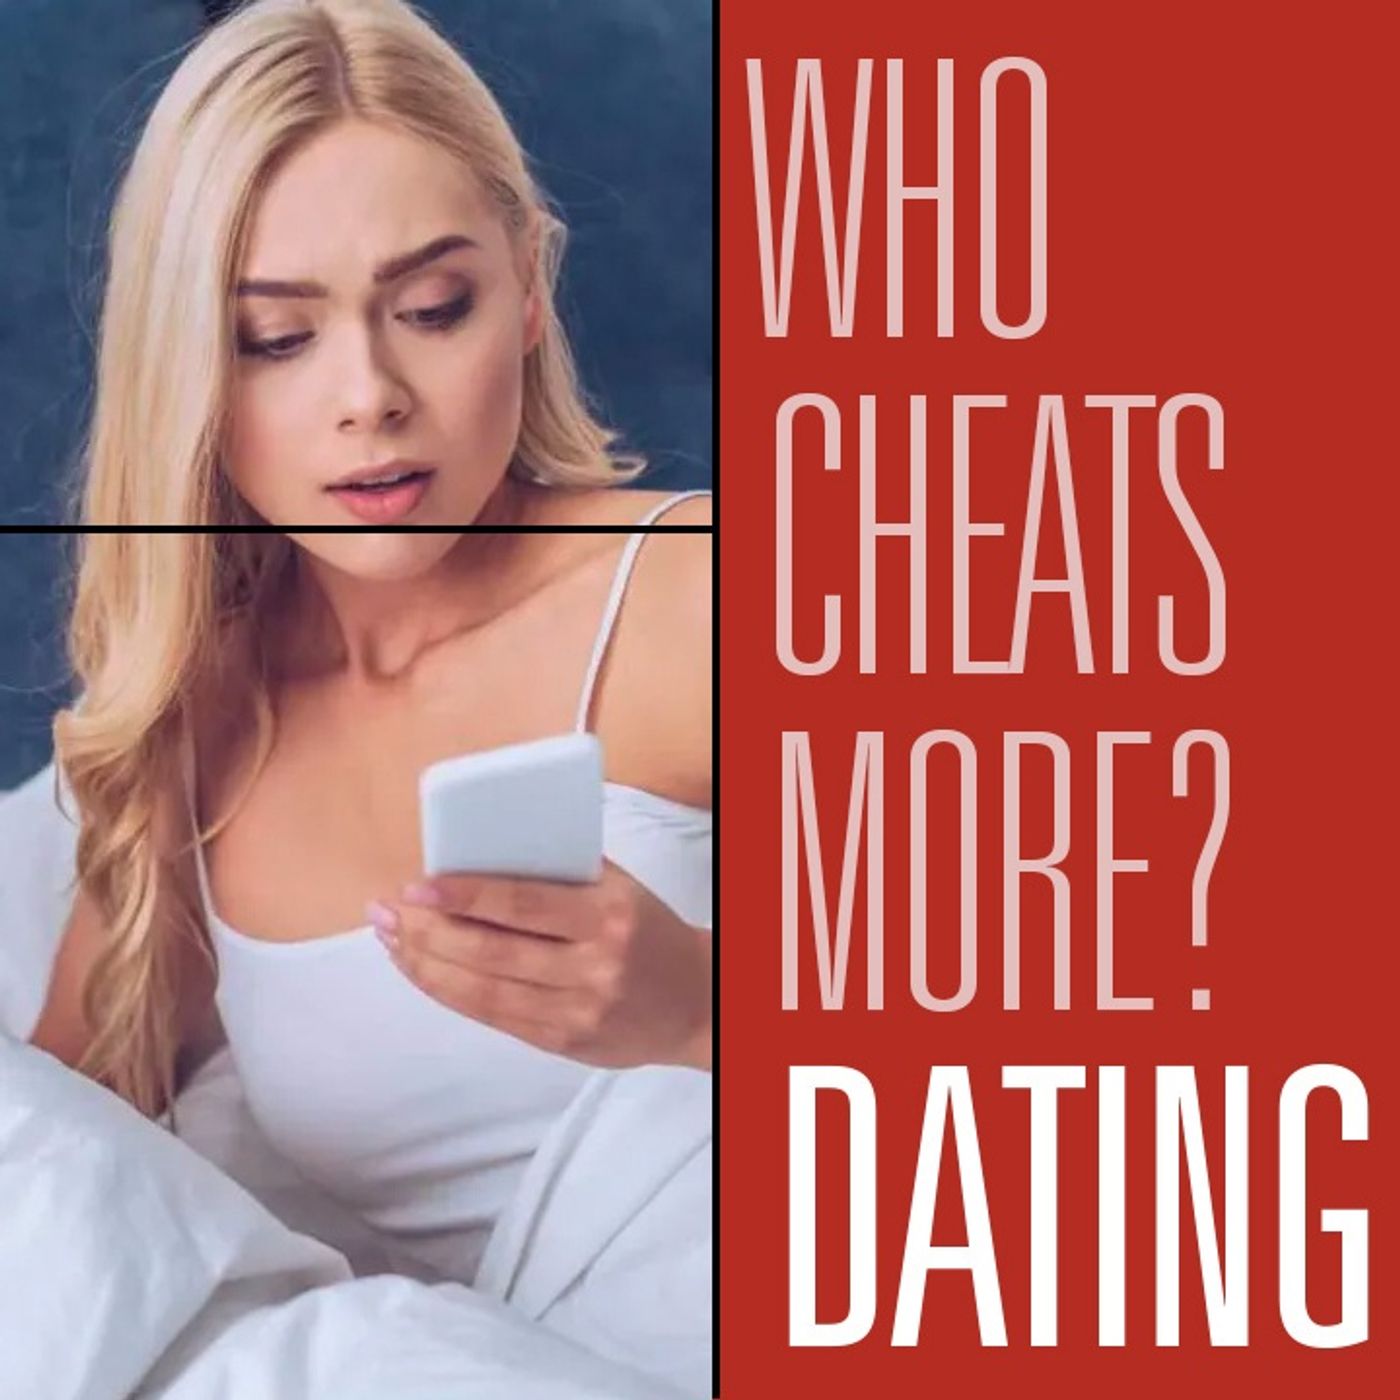 Who Is More Likely to Cheat, Men or Women? | The Dating Show